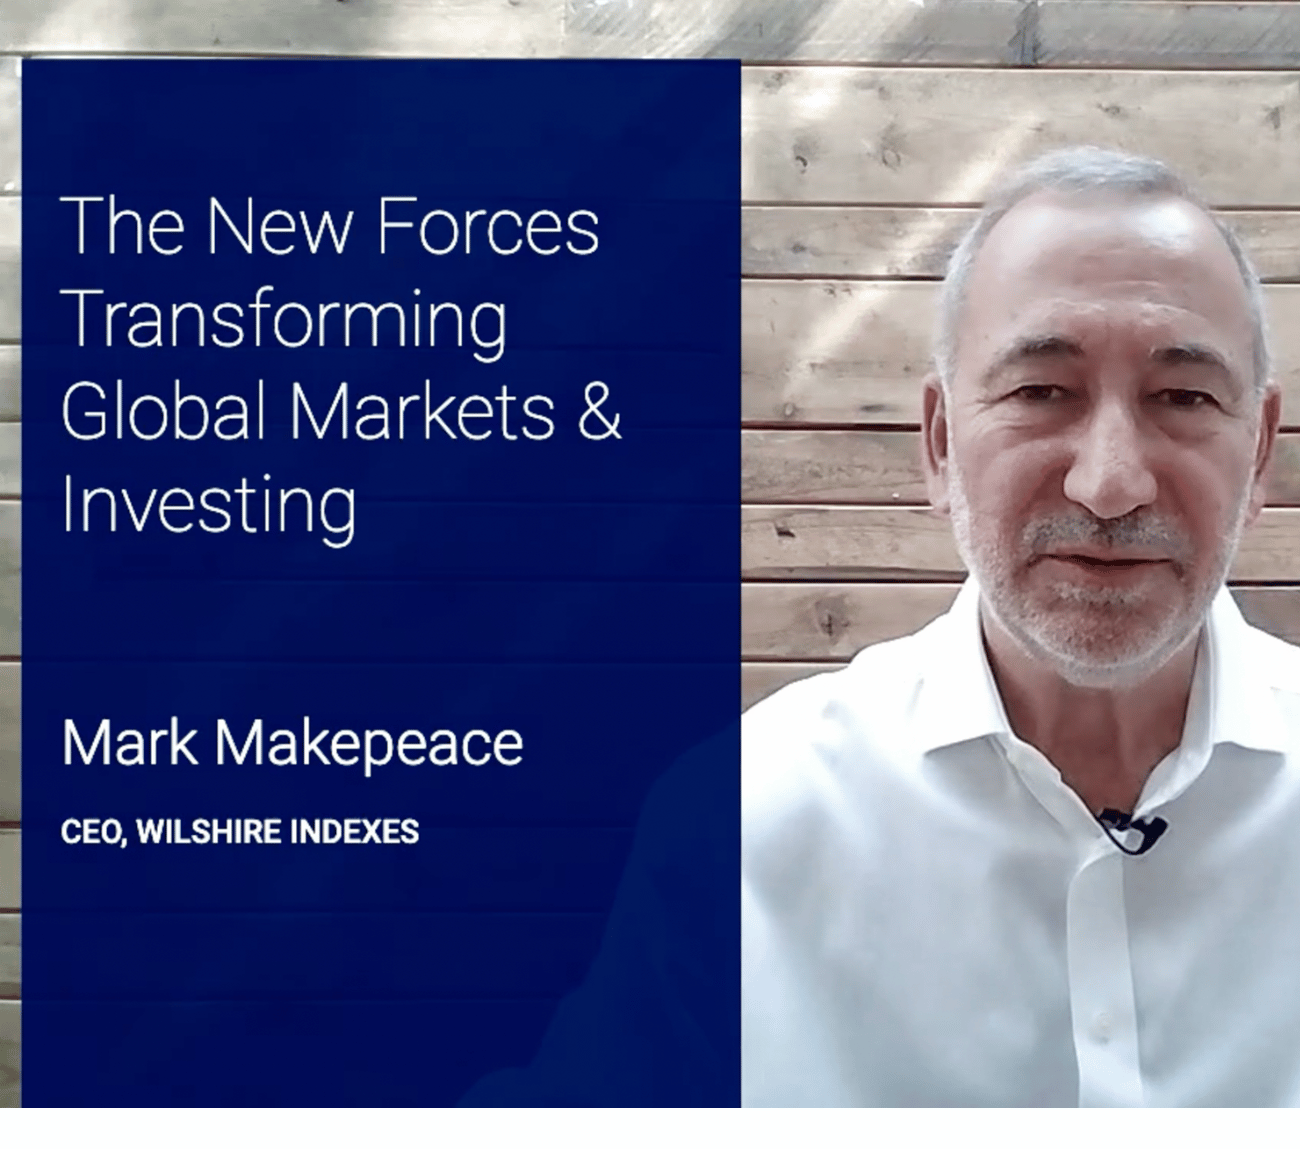 The New Forces Transforming Global Markets & Investing